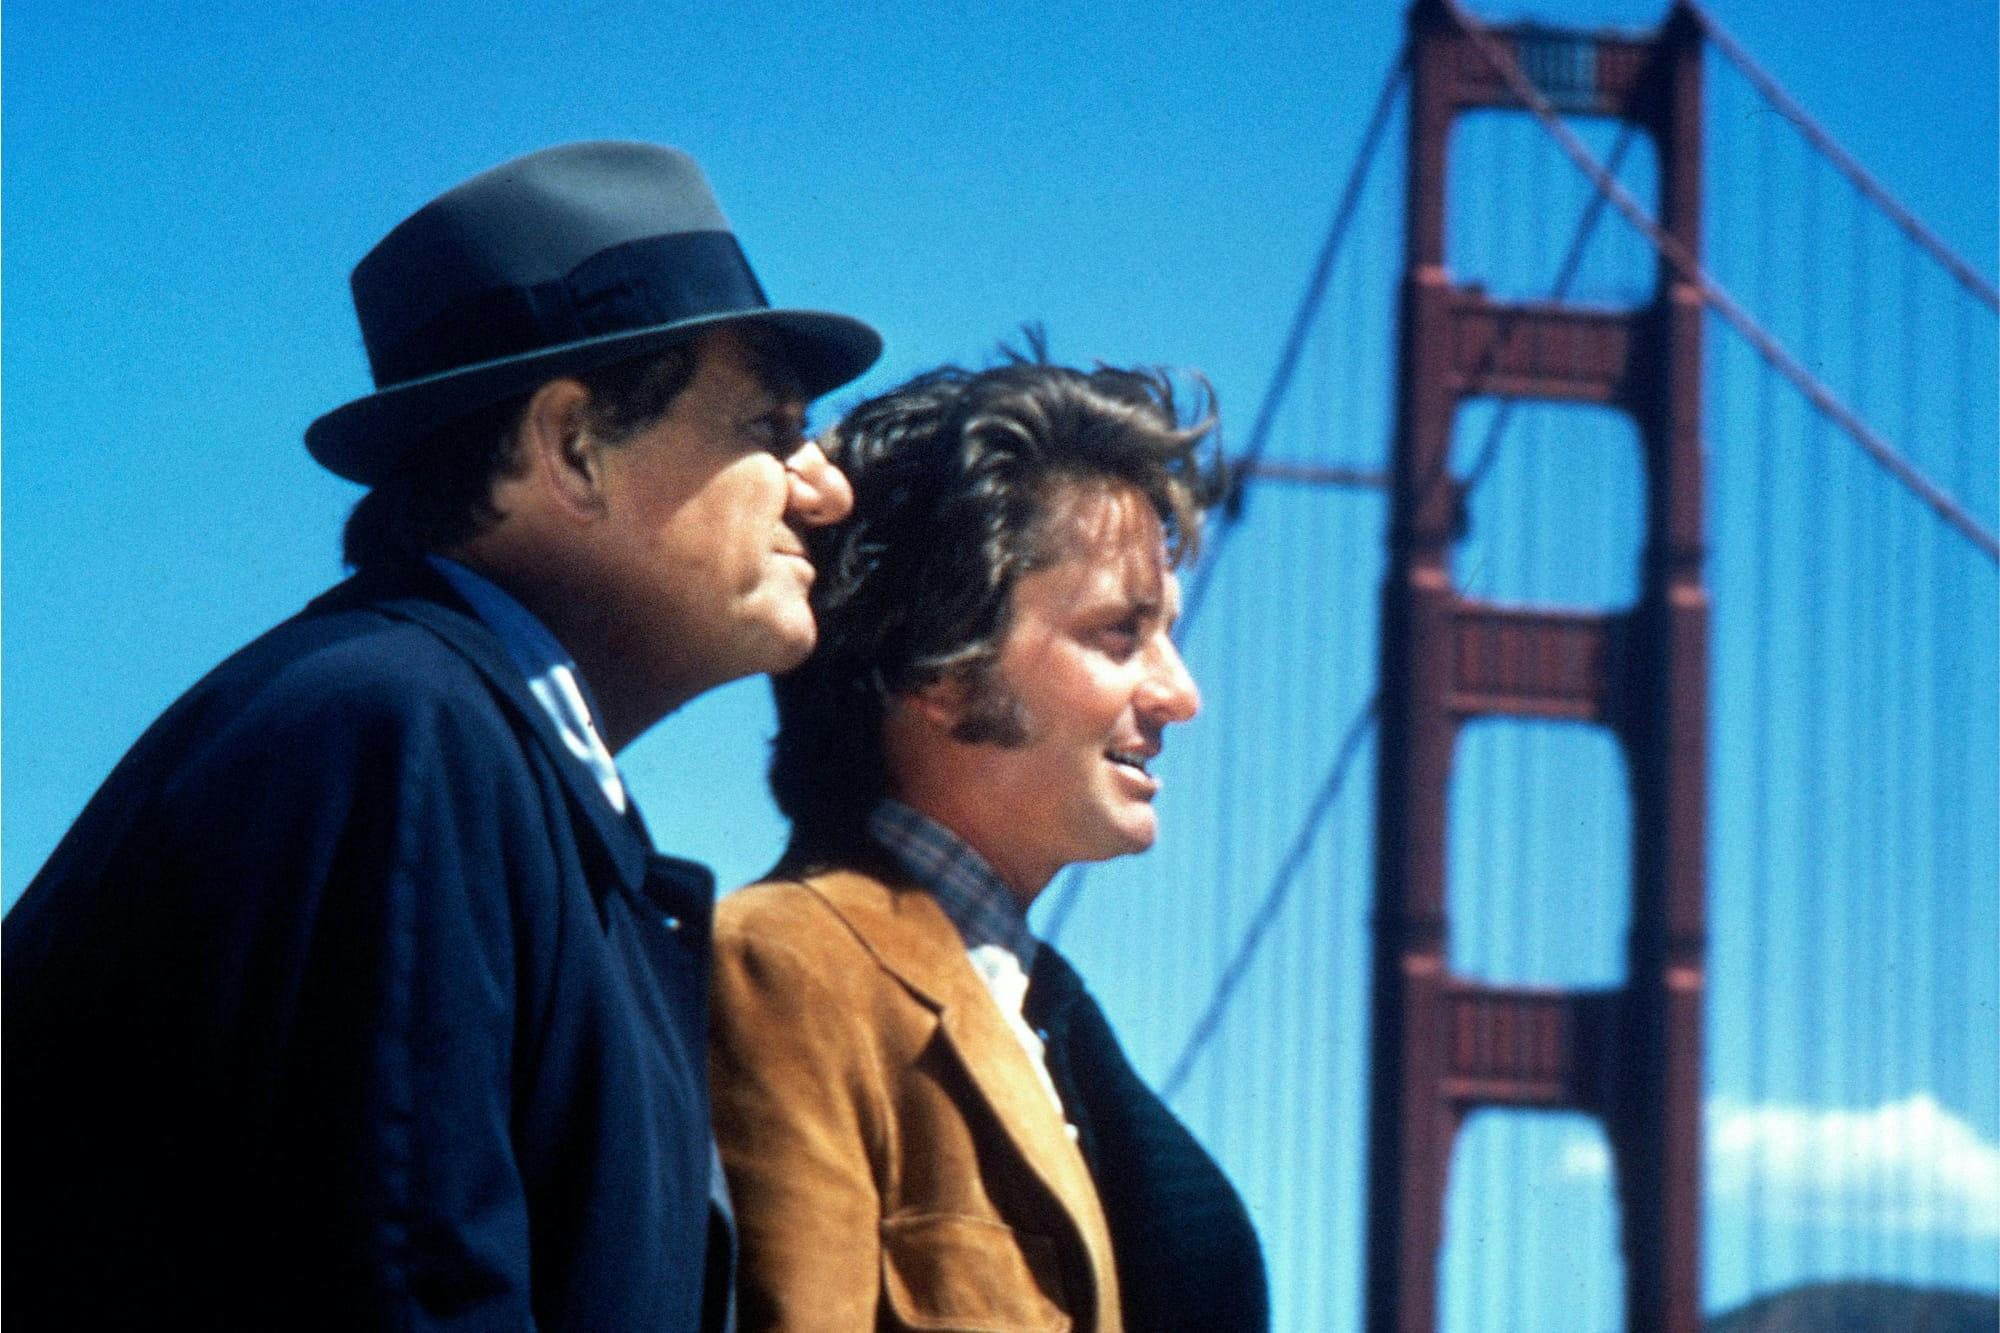 Detective Lieutenant Mike Stone (Karl Madden) and Inspector Steve Keller (Michael Douglas) in The Streets of San Francisco stand by the Golden Gate Bridge, looking out on the water.